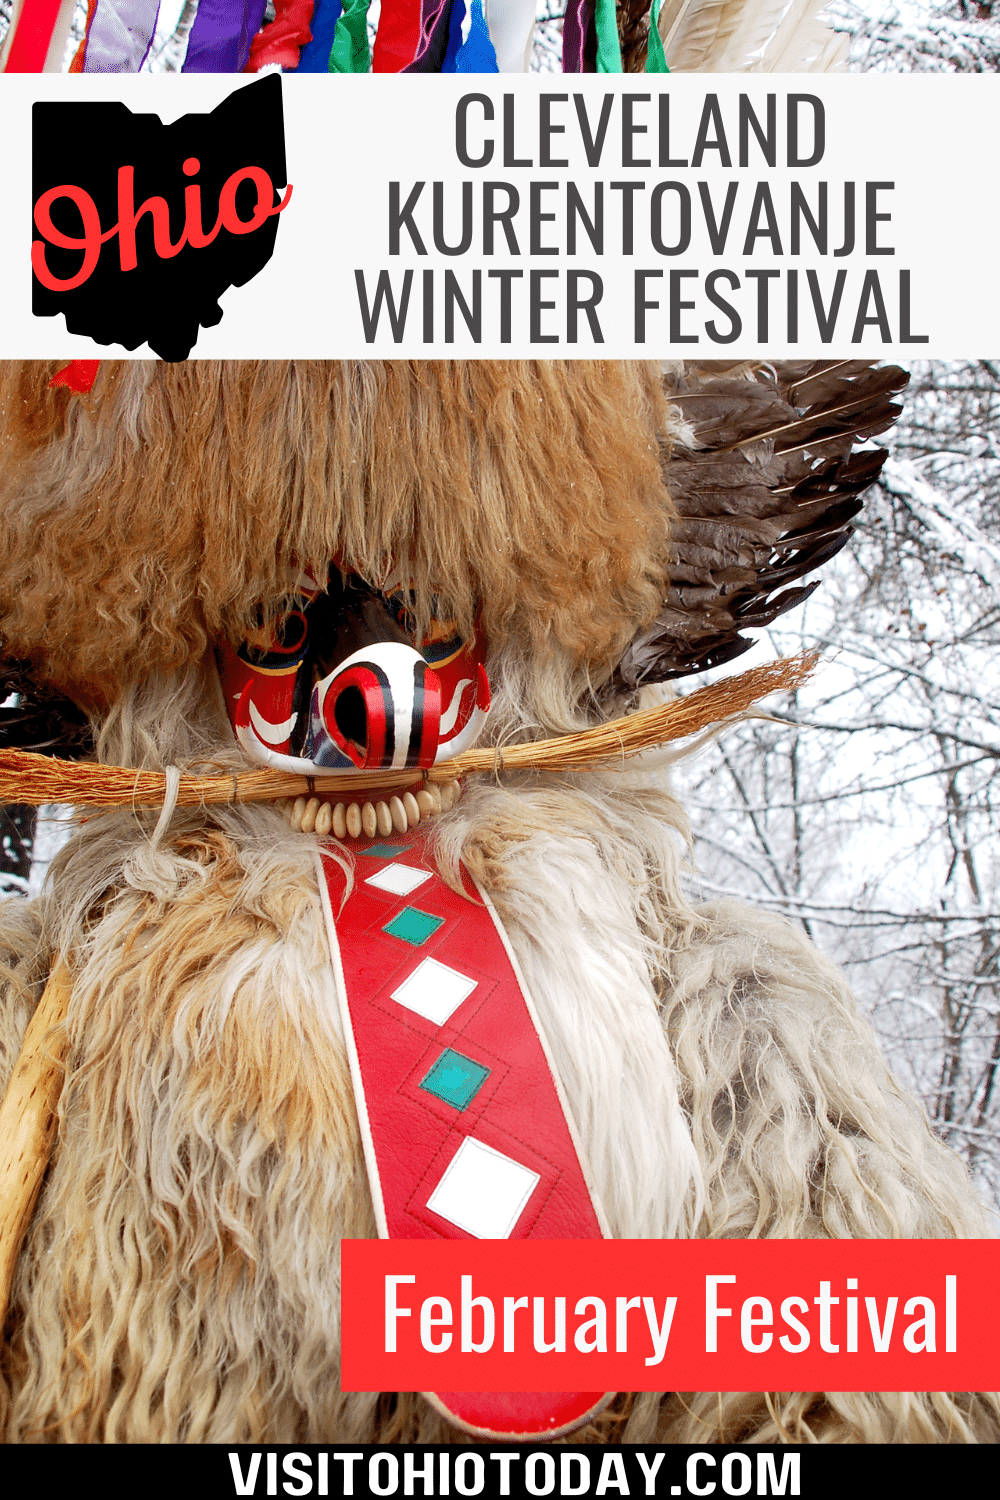 The Cleveland Kurentovanje Winter Festival is an annual event celebrating Cleveland’s Slovenian heritage and takes place in early February.